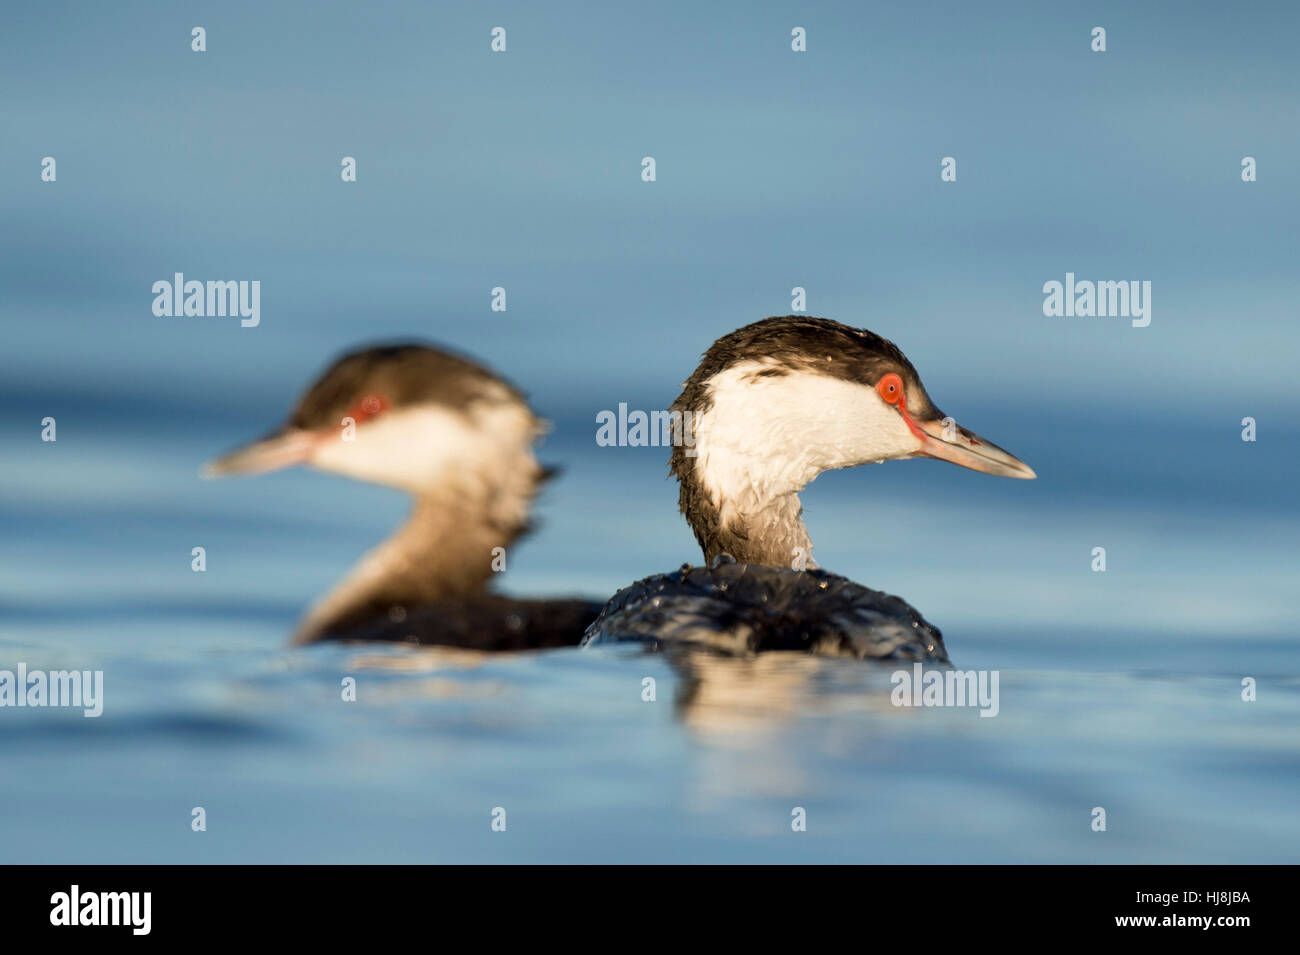 A pair of Horned Grebes swim in the bright blue water on a sunny day. Stock Photo